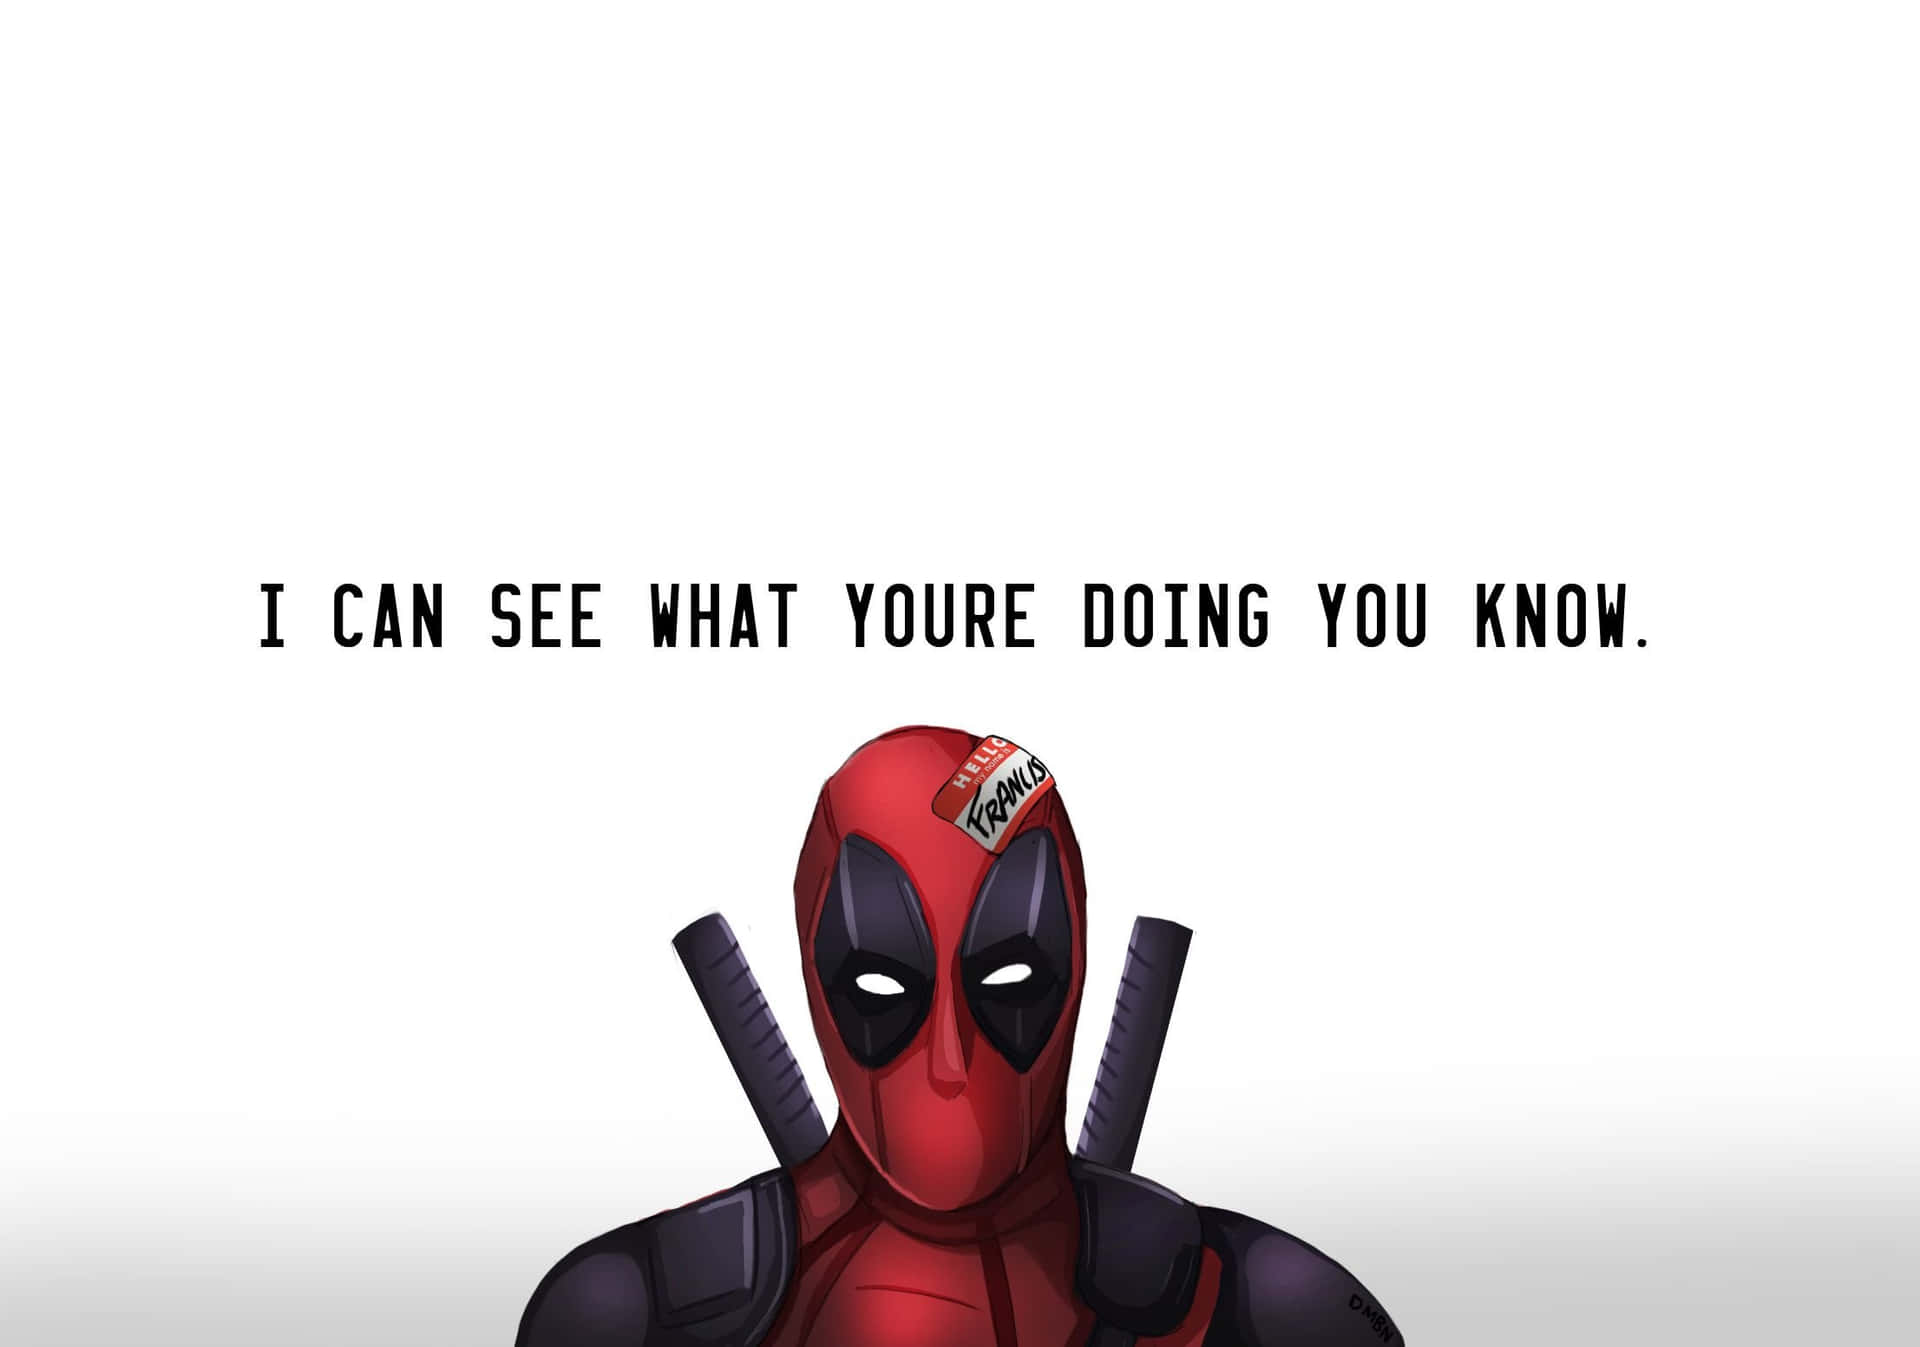 Deadpool gets creative getting ready for the next mission Wallpaper